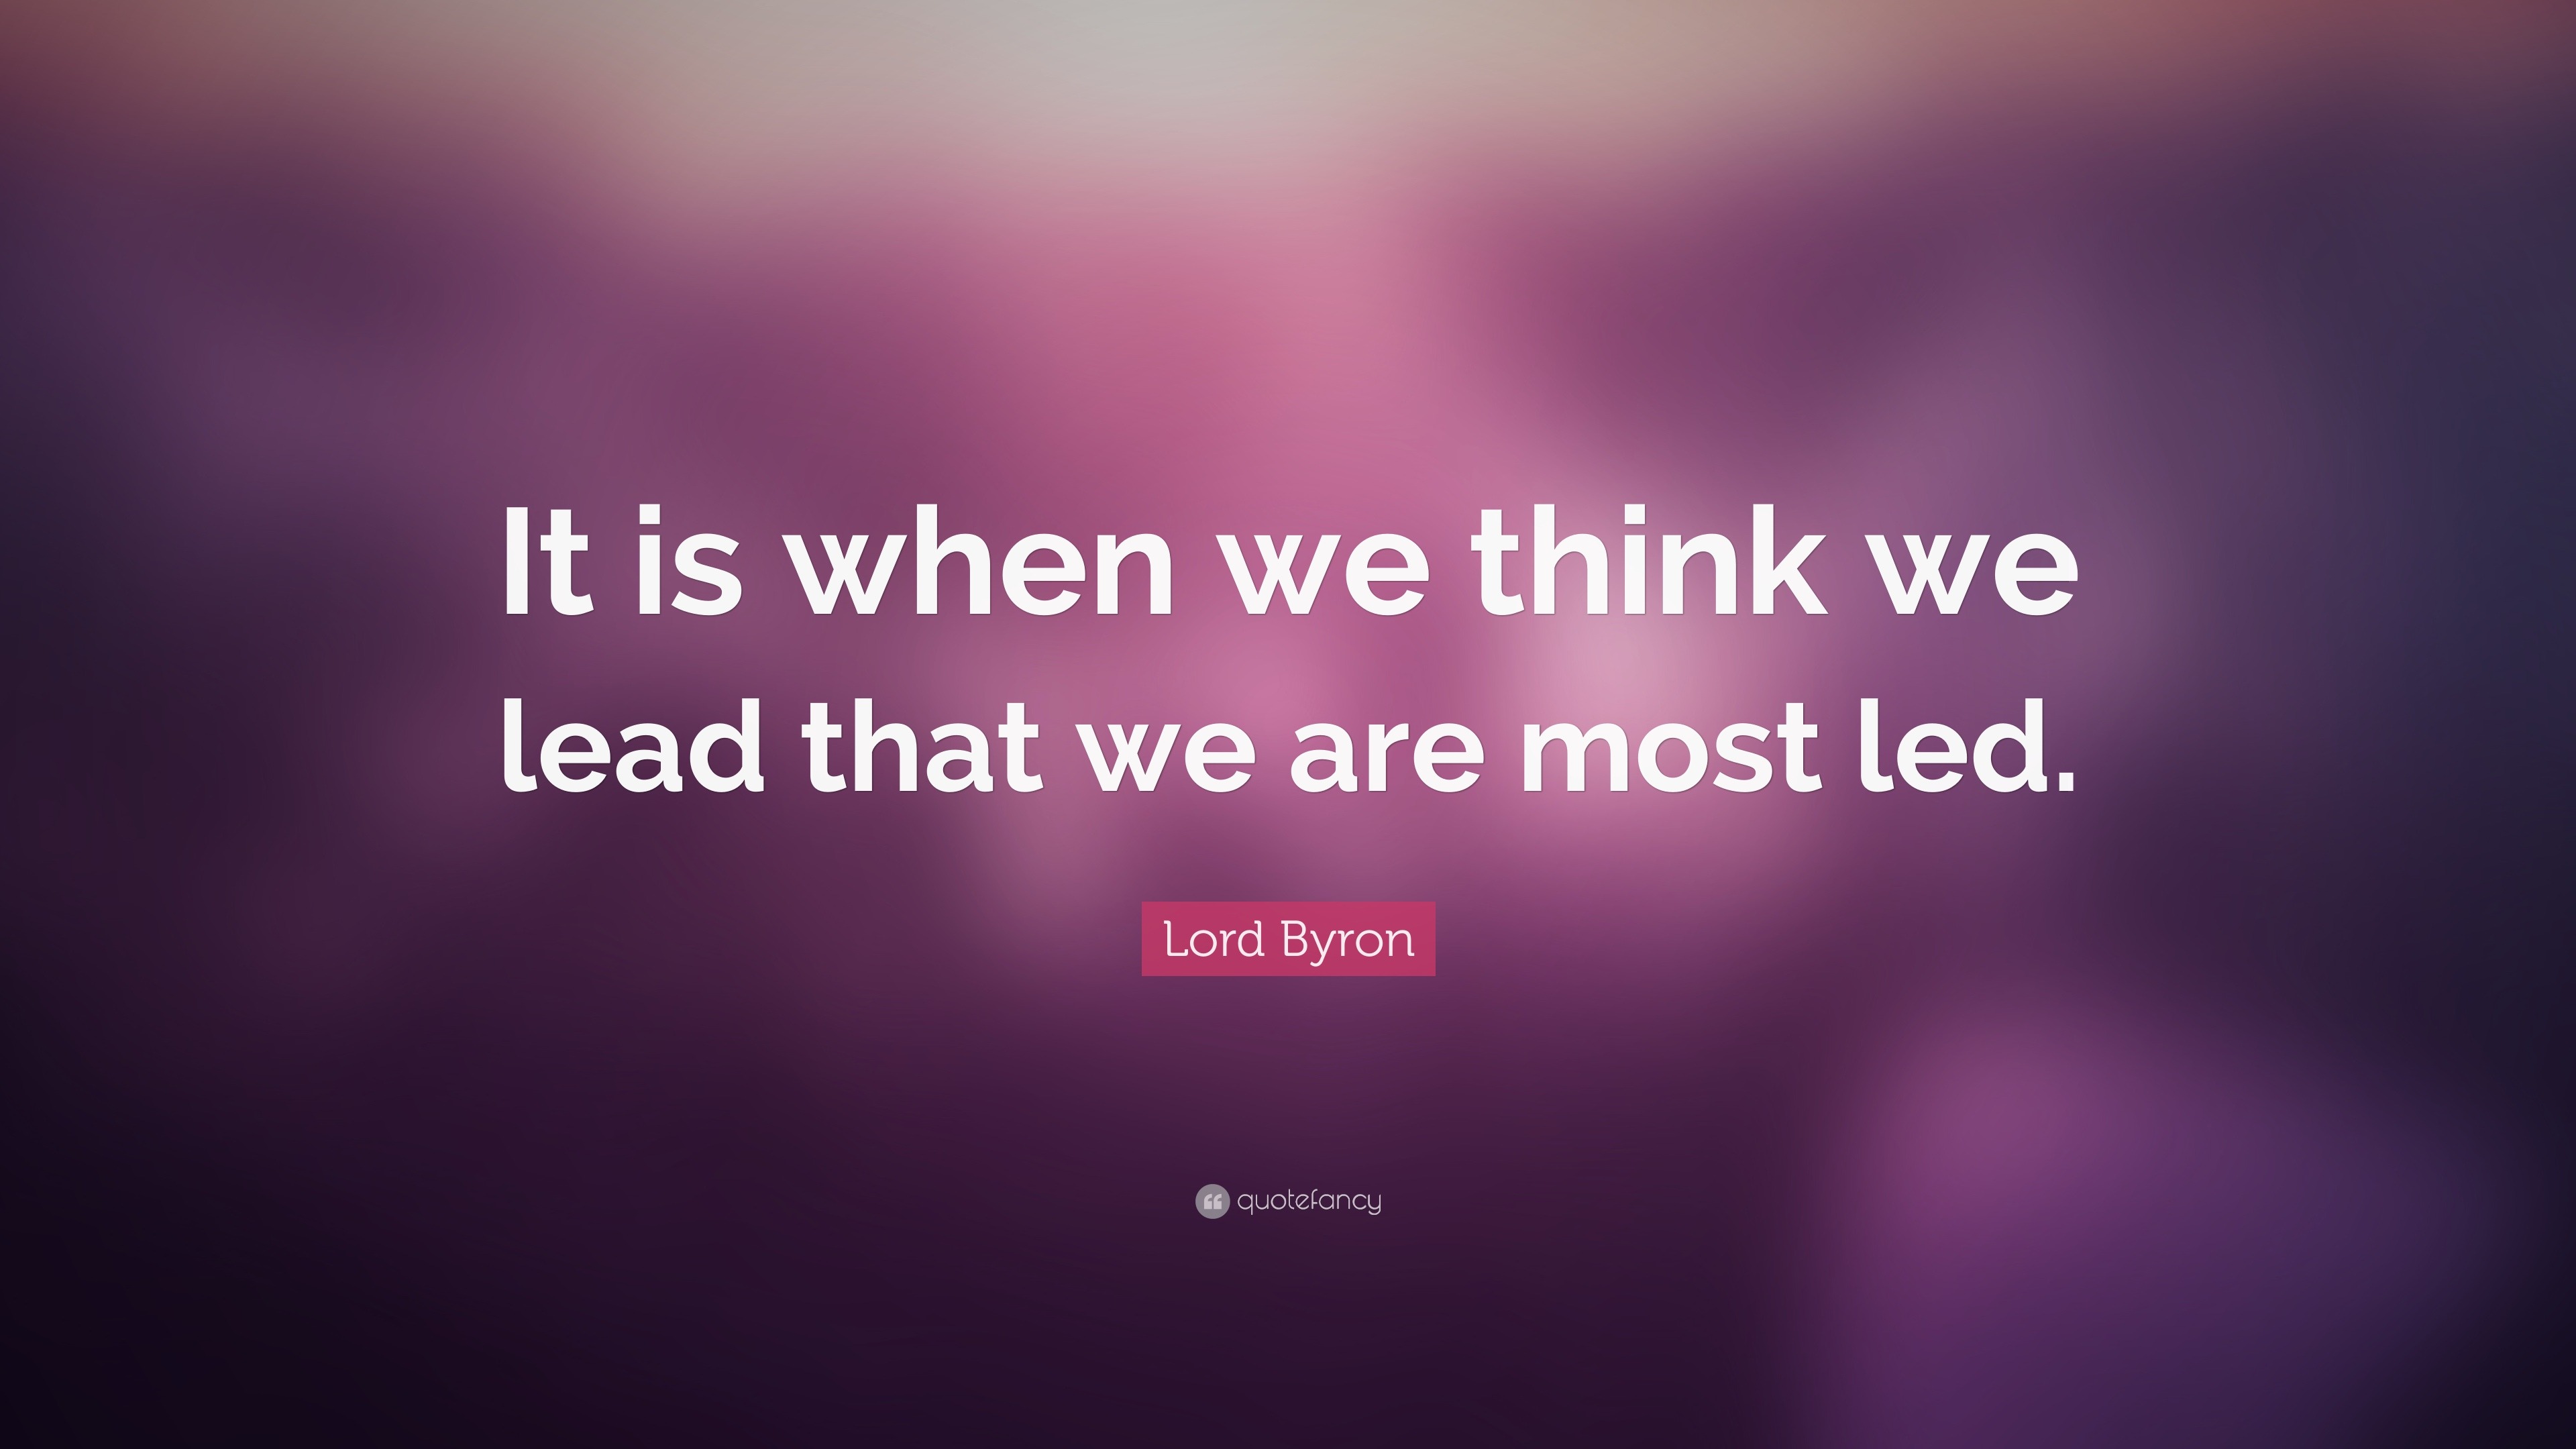 Lord Byron Quote “It is when we think we lead that we are most led.”